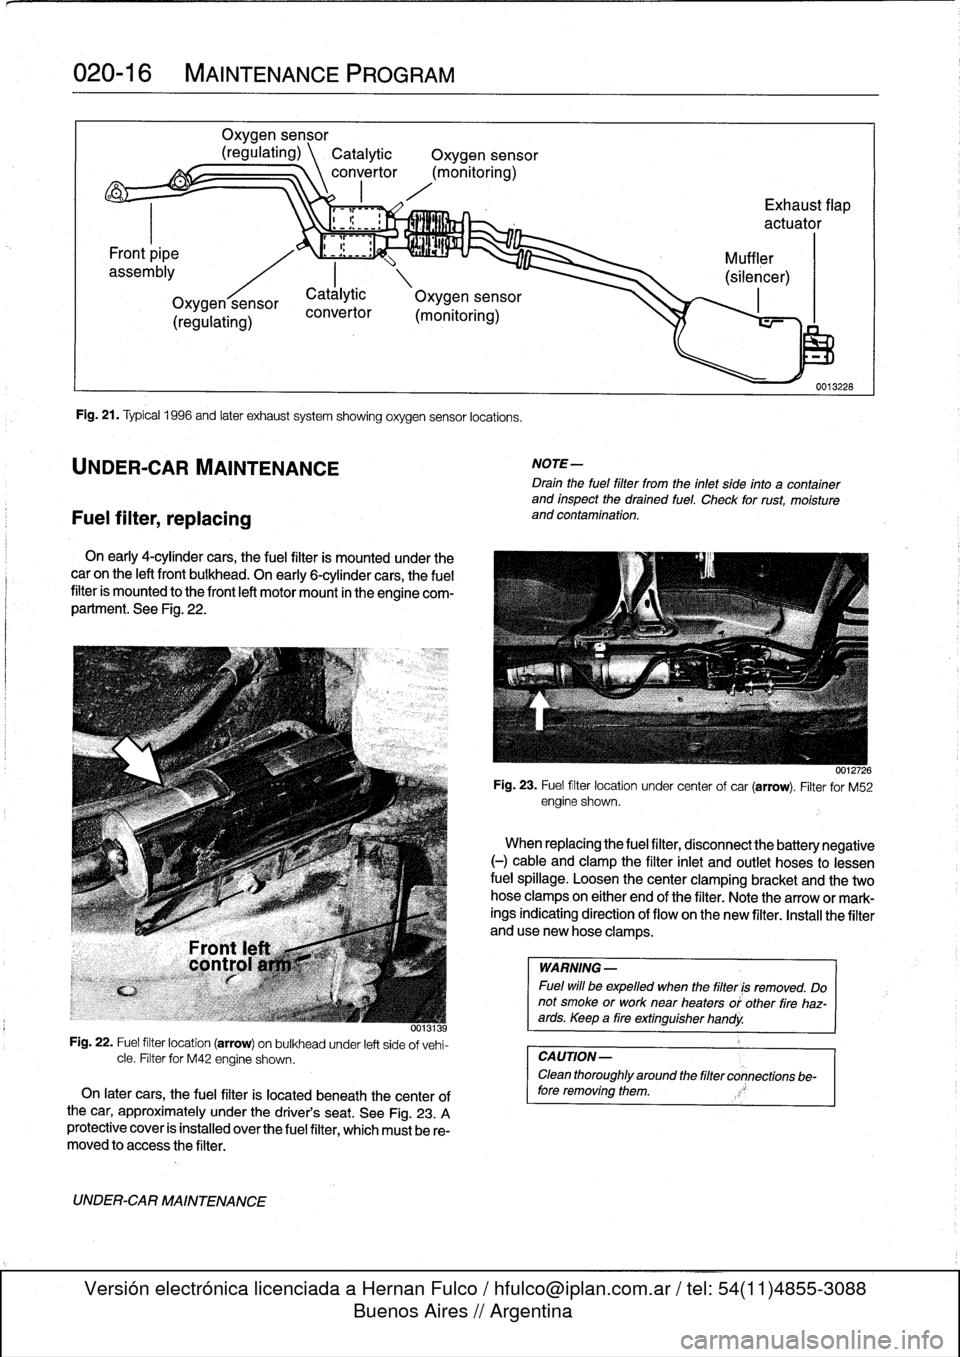 BMW M3 1992 E36 Workshop Manual 
020-
1
6

	

MAINTENANCE
PROGRAM

Fuel
filter,
replacing

Oxygen
sensor

(regulating)
\
Catalytic

	

Oxygen
sensor
convertor
(monitoring)

Fig
.
21
.
Typical
1996
and
later
exhaust
system
showing
ox